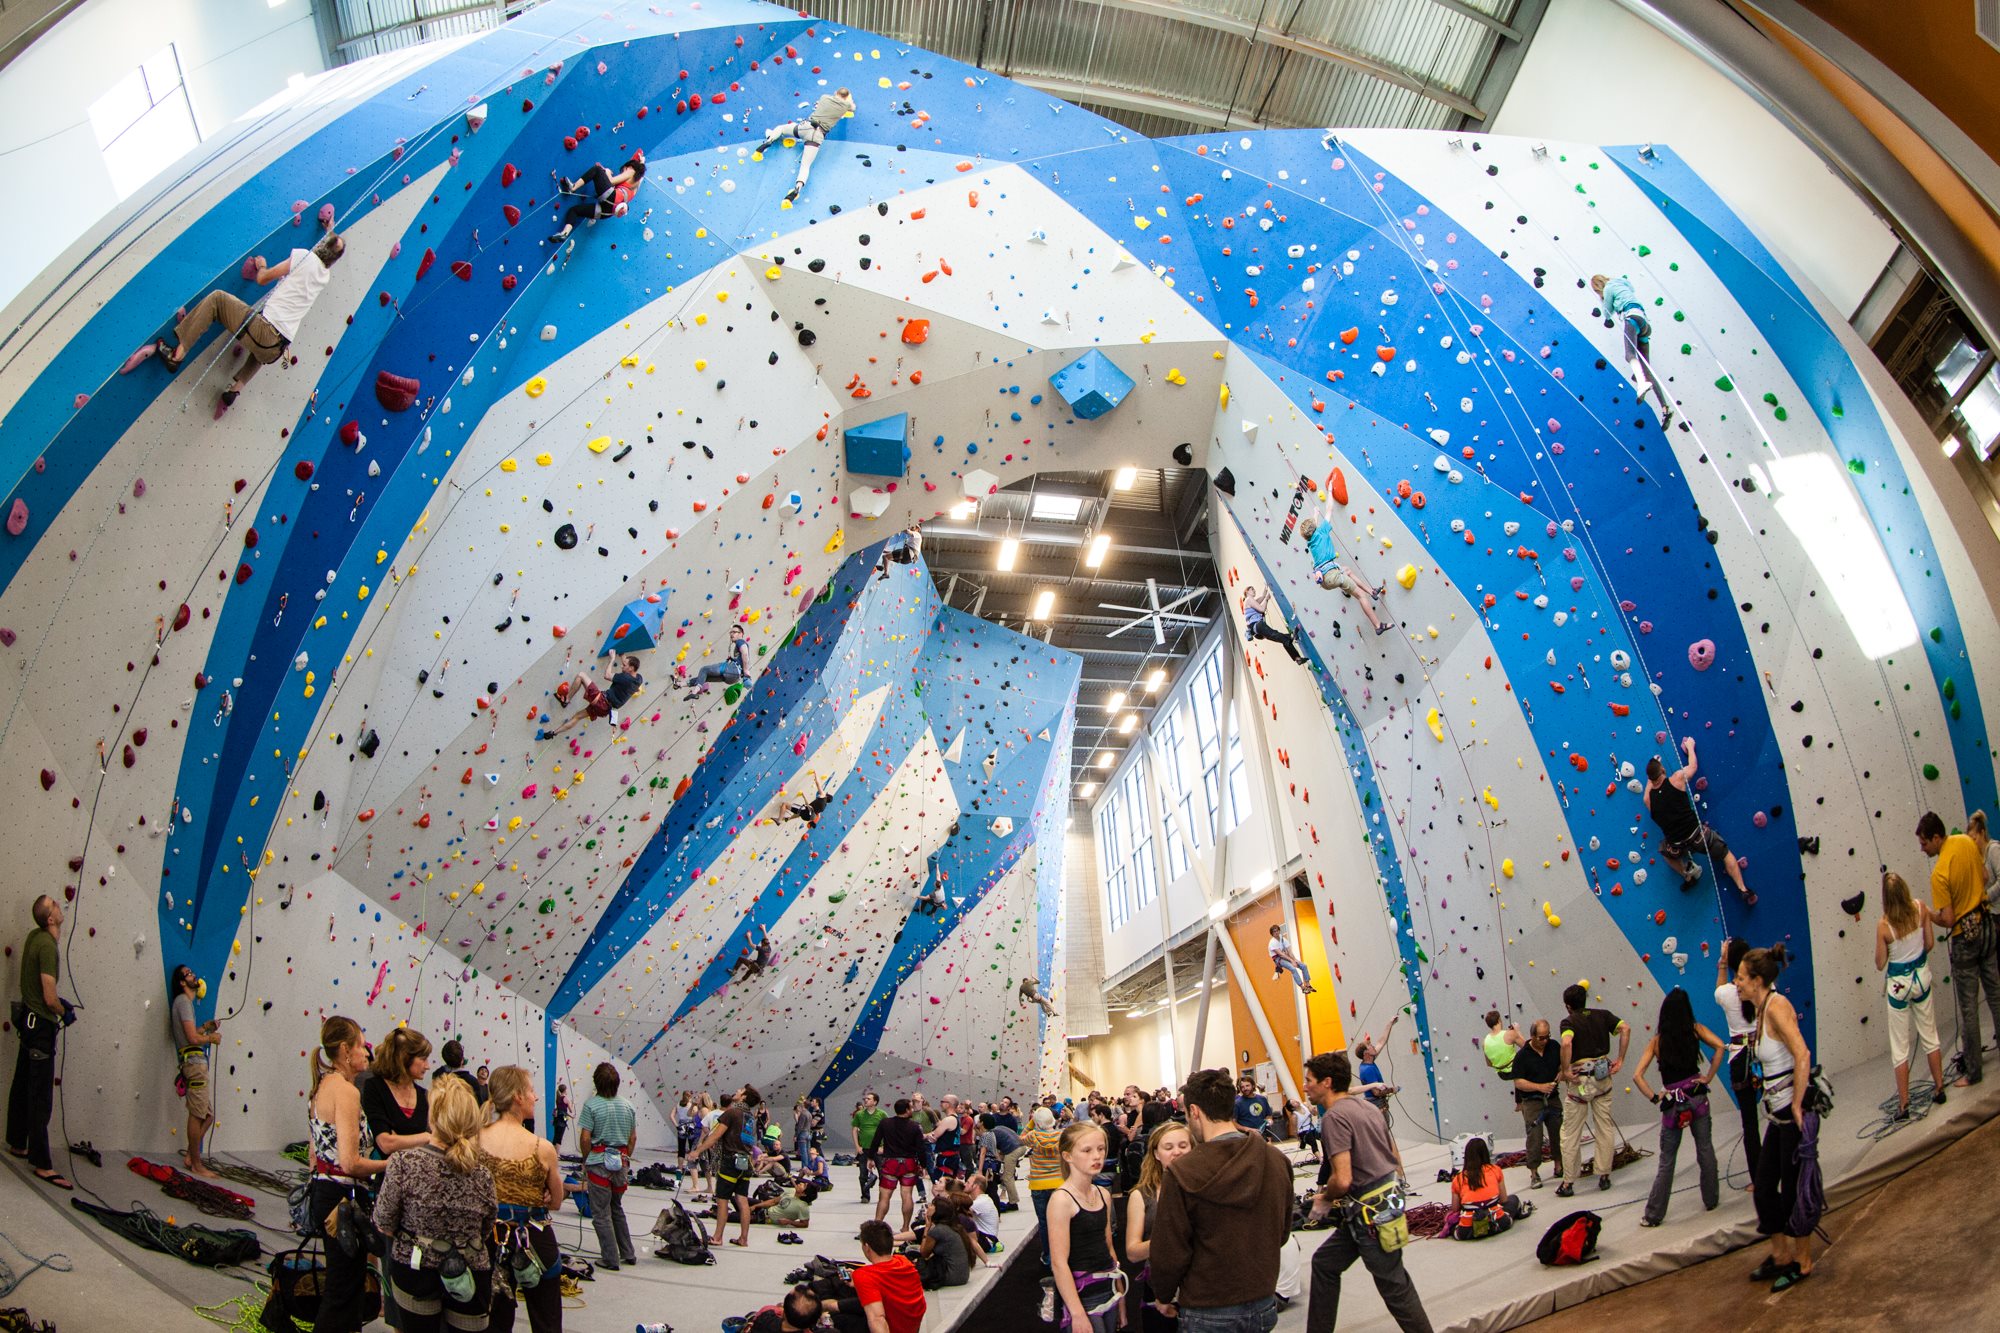 The new Momentum Millcreek climbing gym hosted a members only preview night on Monday, April 14th, 2014.